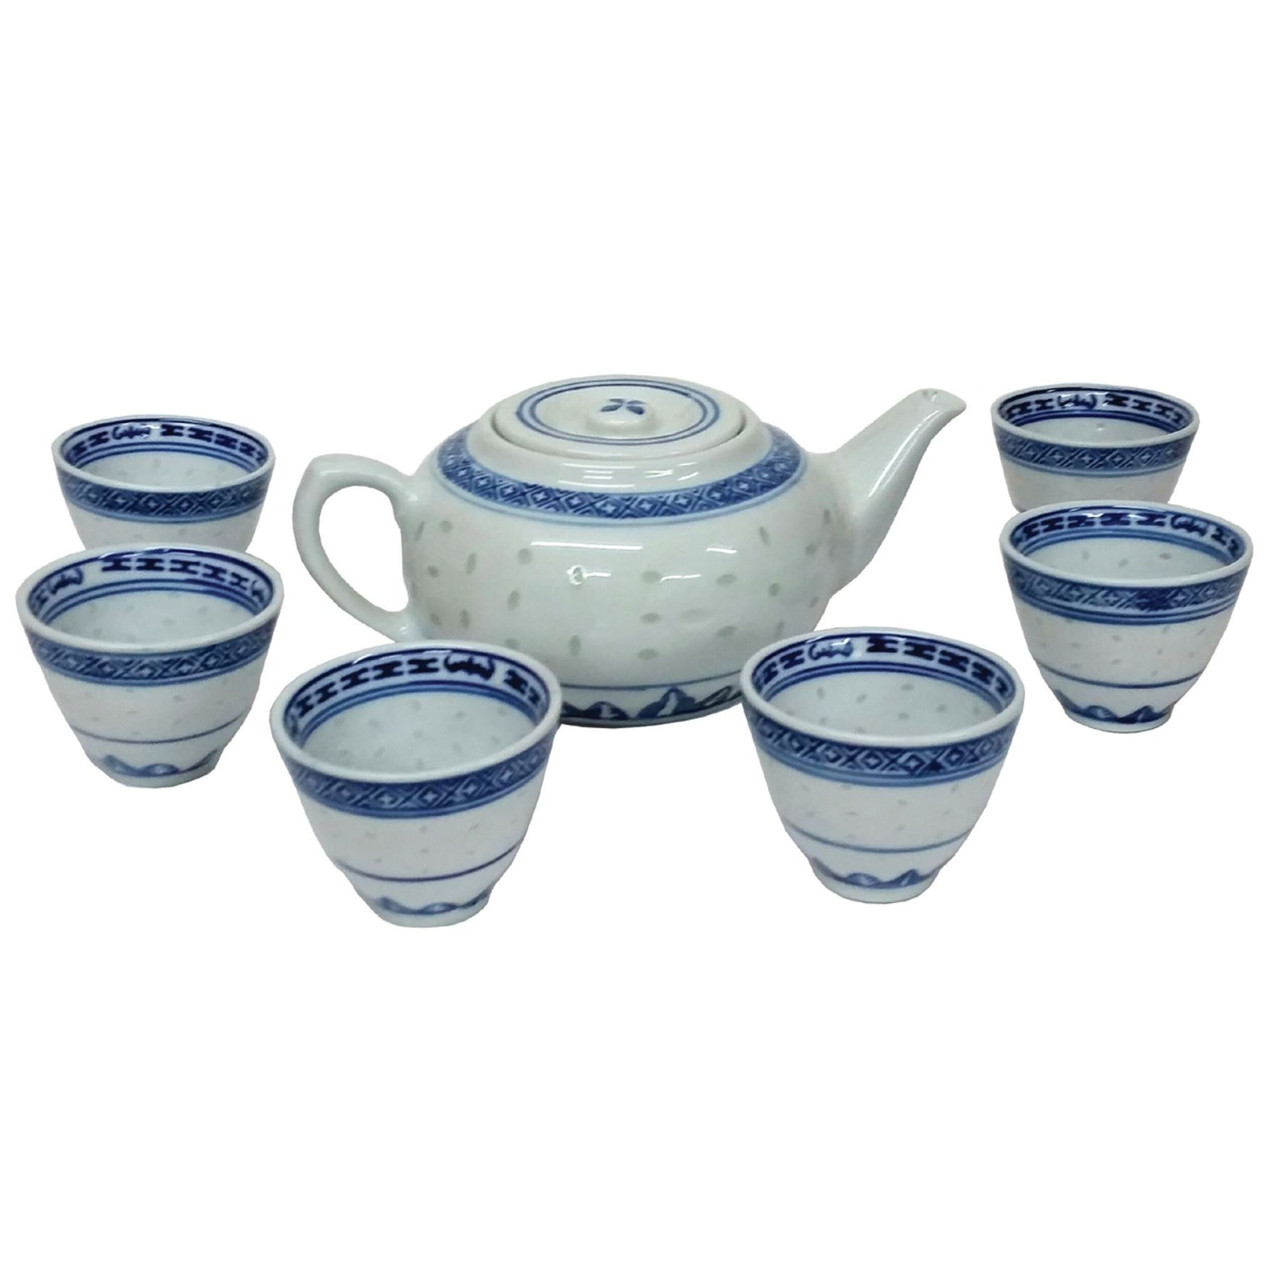 Chinese Tea Set - Blue and White Rice Pattern - 6 Cups - 650ml.